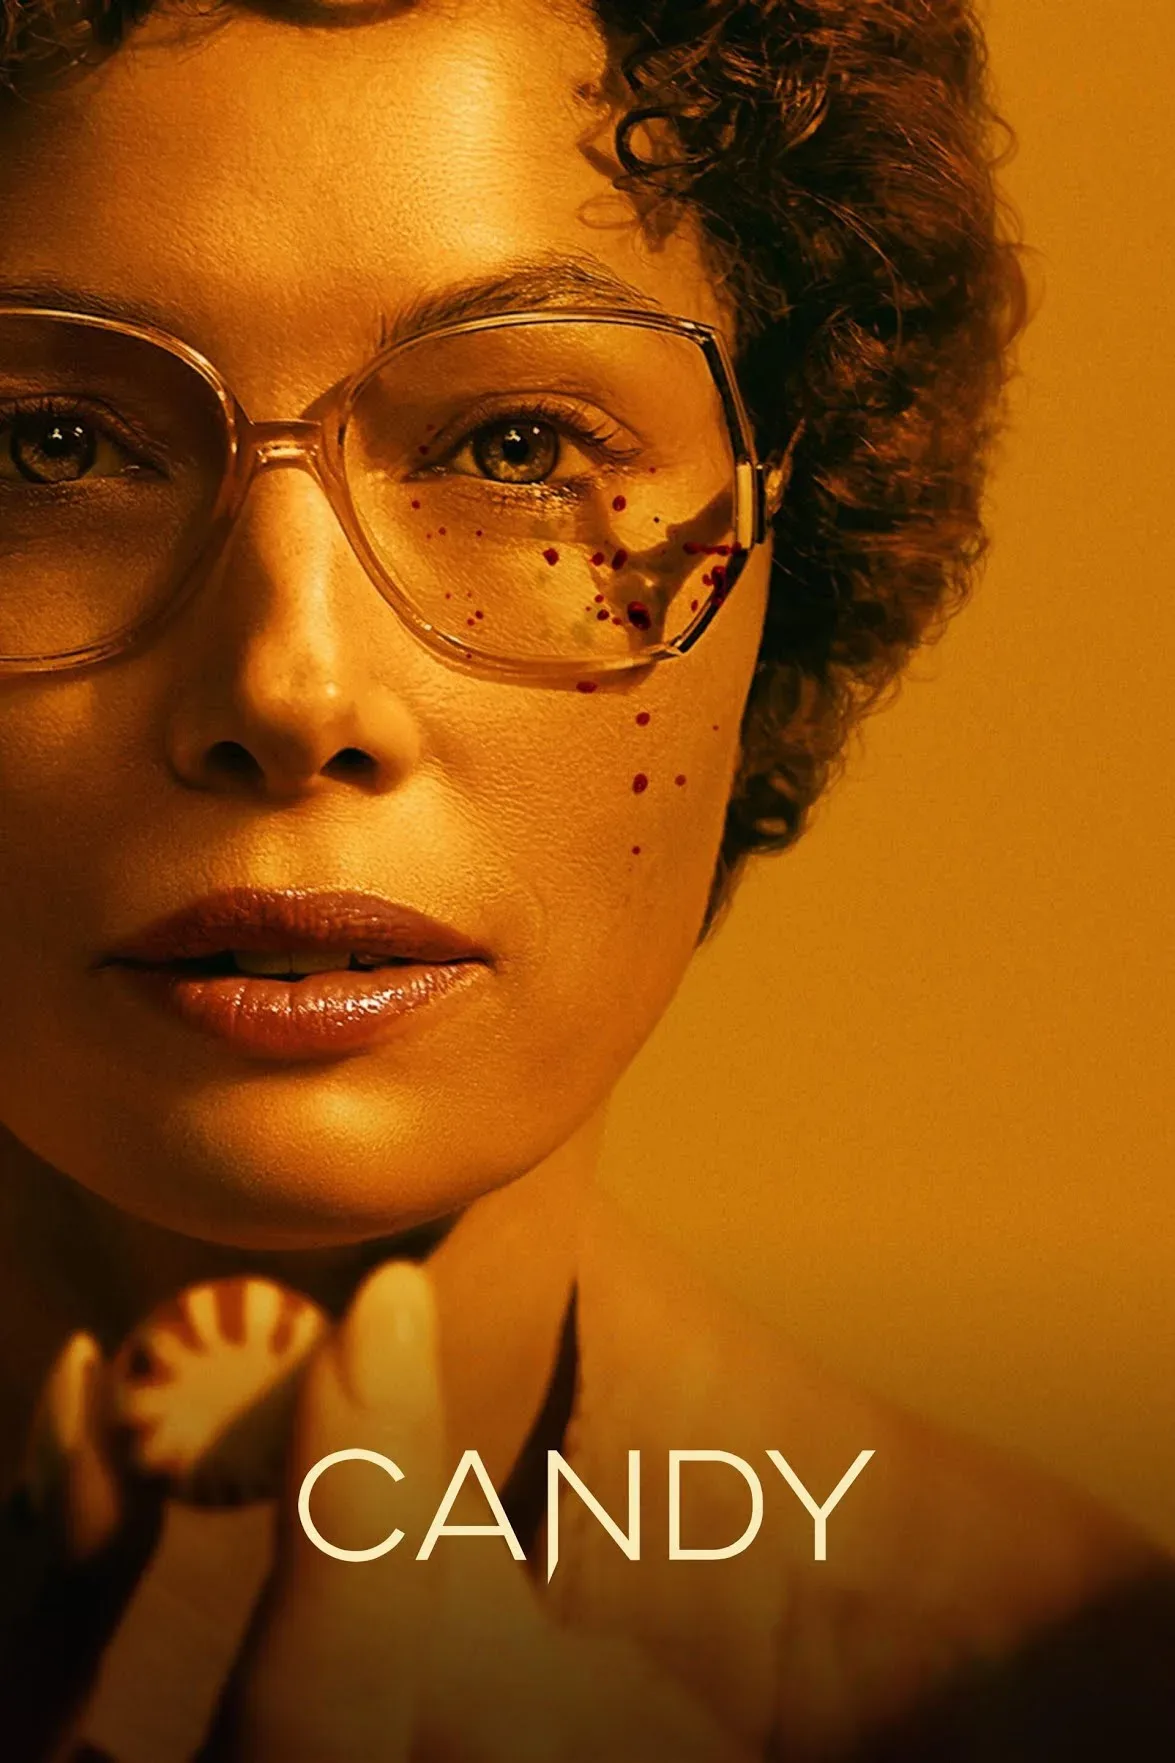 Candy Montgomery is a 1980 housewife and mother who did everything right—good husband, two kids, nice house, even the careful planning and execution of transgressions—but when the pressure of conformity builds within her, her actions scream for just a bit of freedom. Until someone tells her to shush. With deadly results.